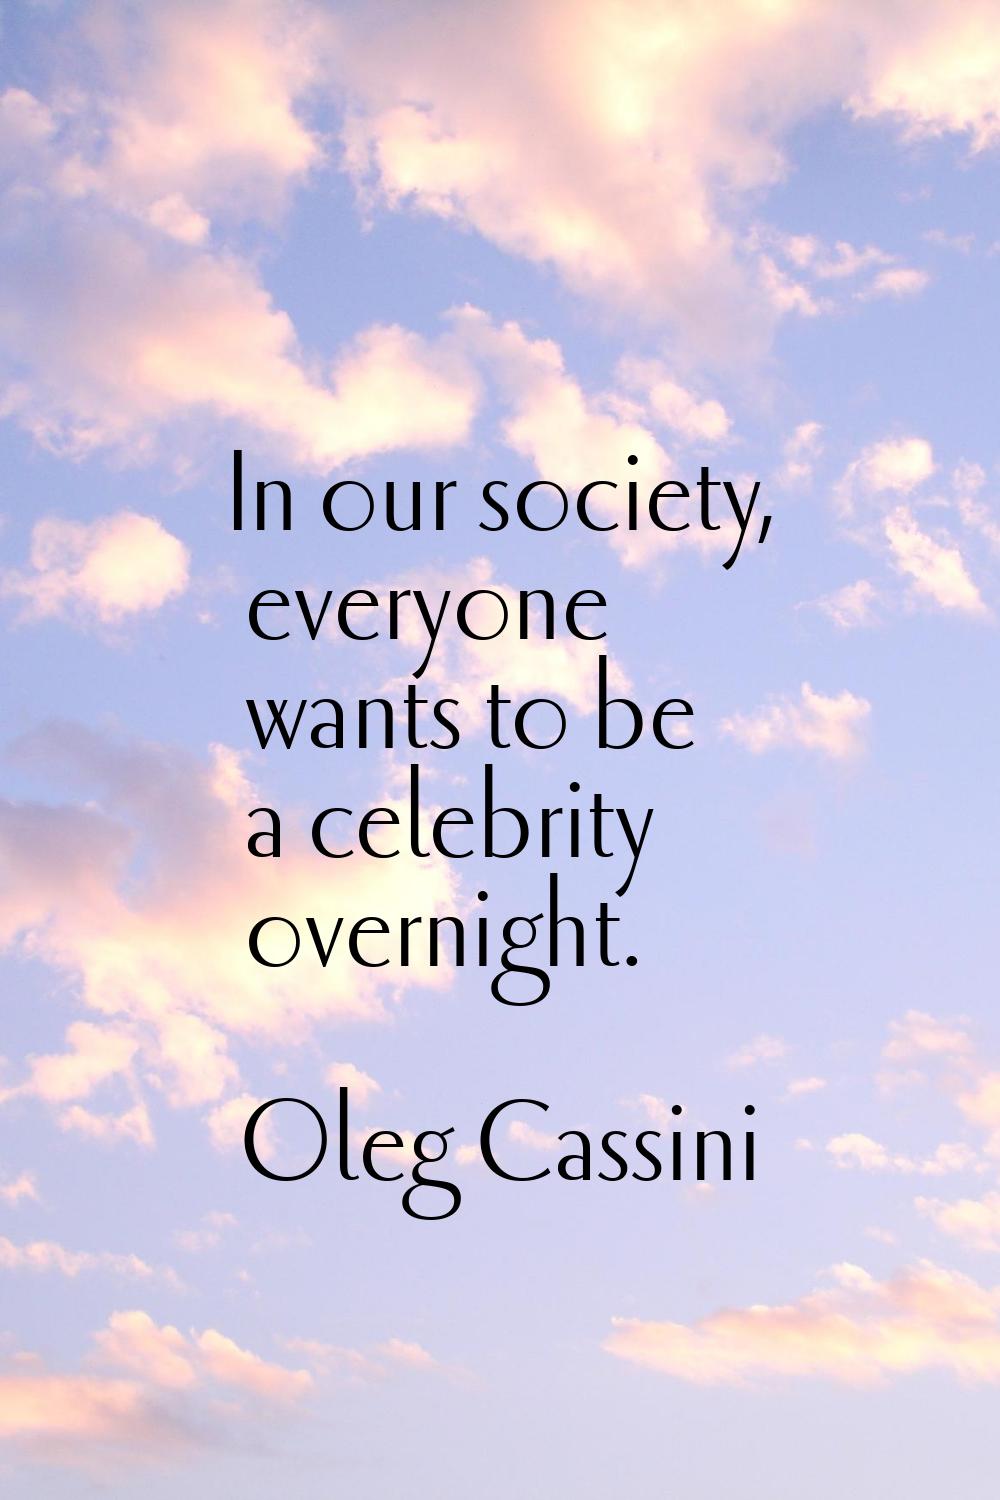 In our society, everyone wants to be a celebrity overnight.